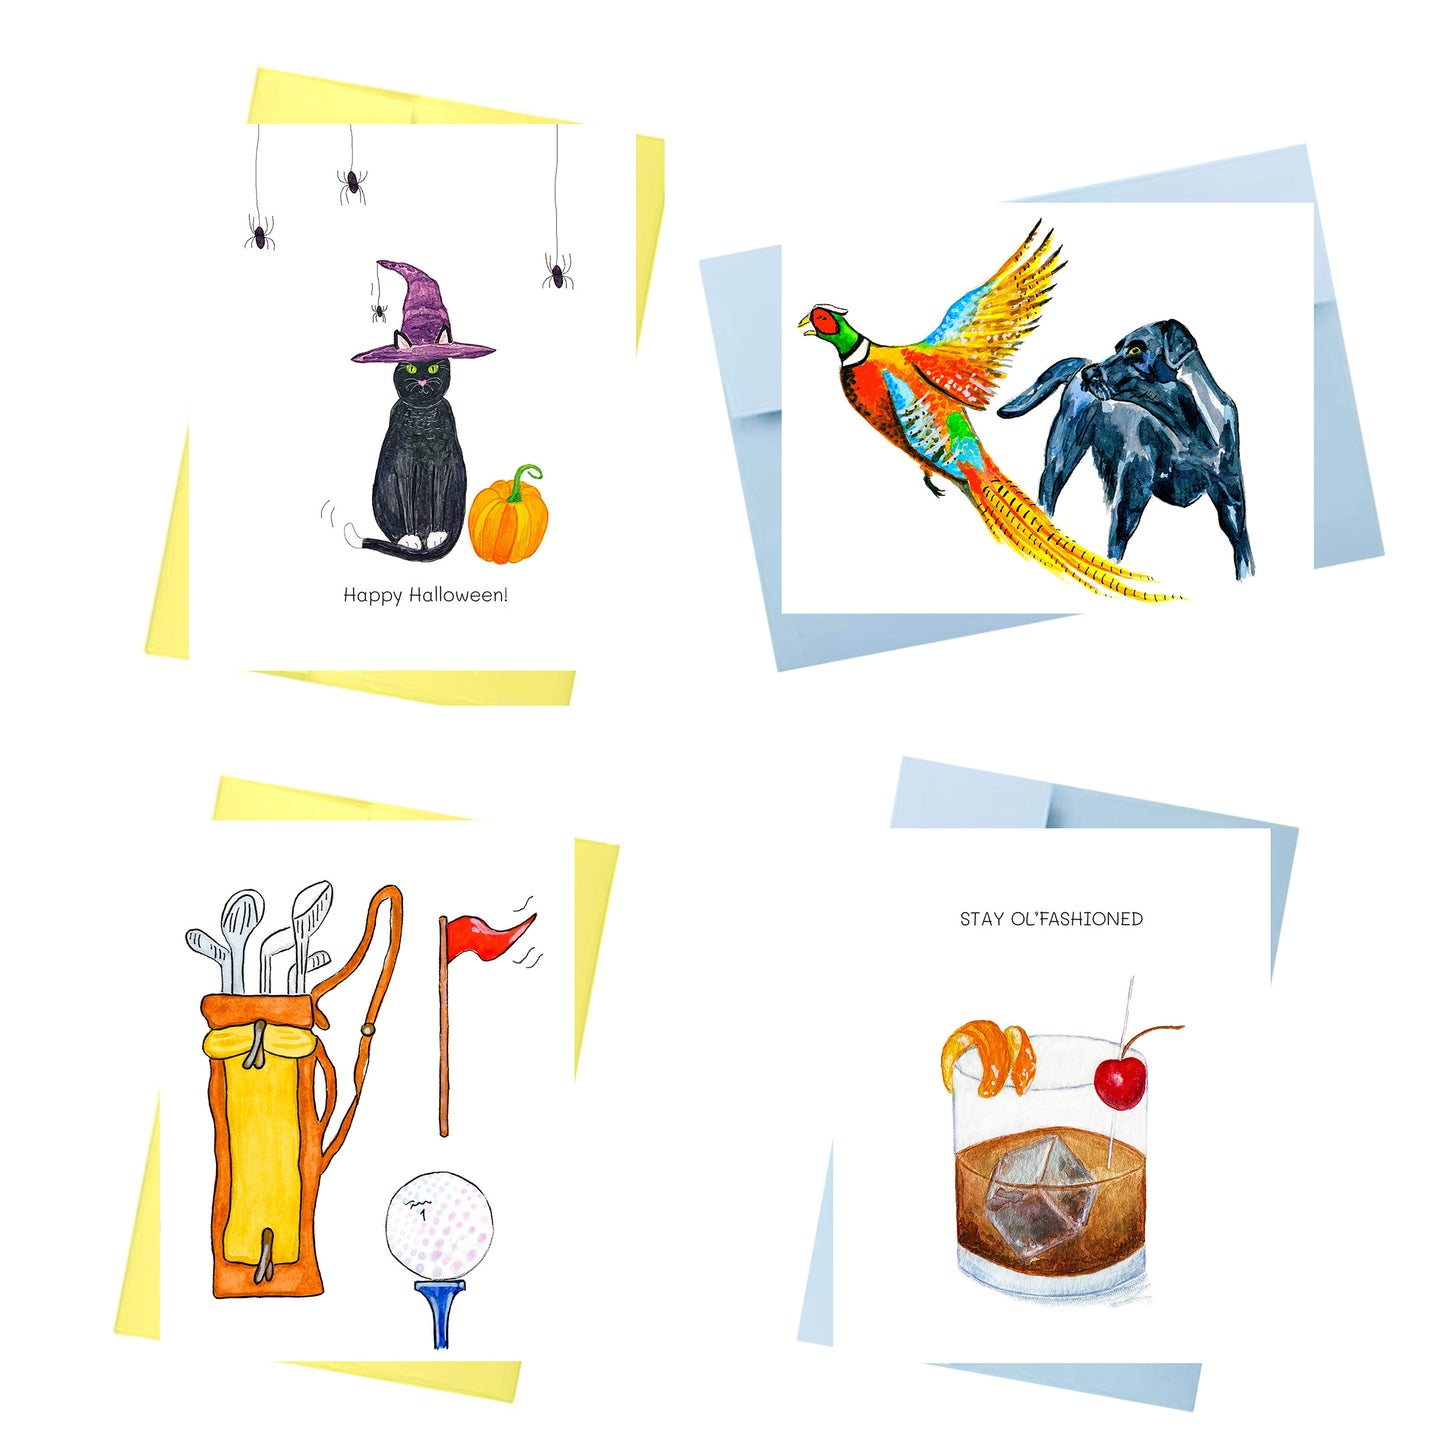 5-pack greeting card subscription